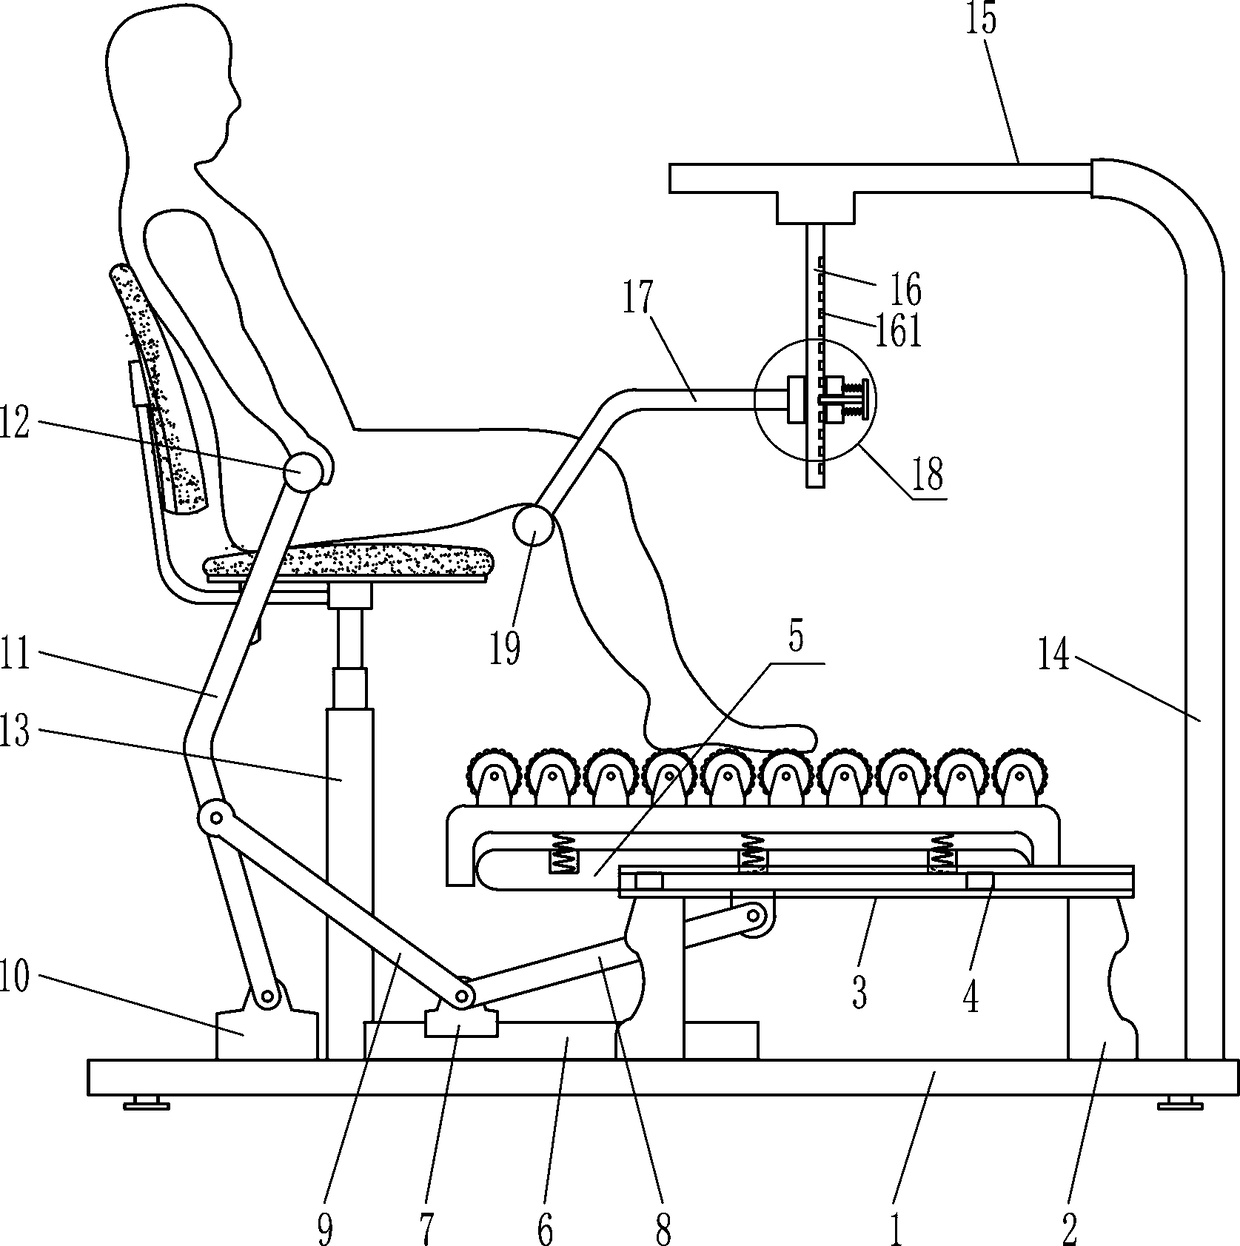 Hand-operated foot sole massaging device